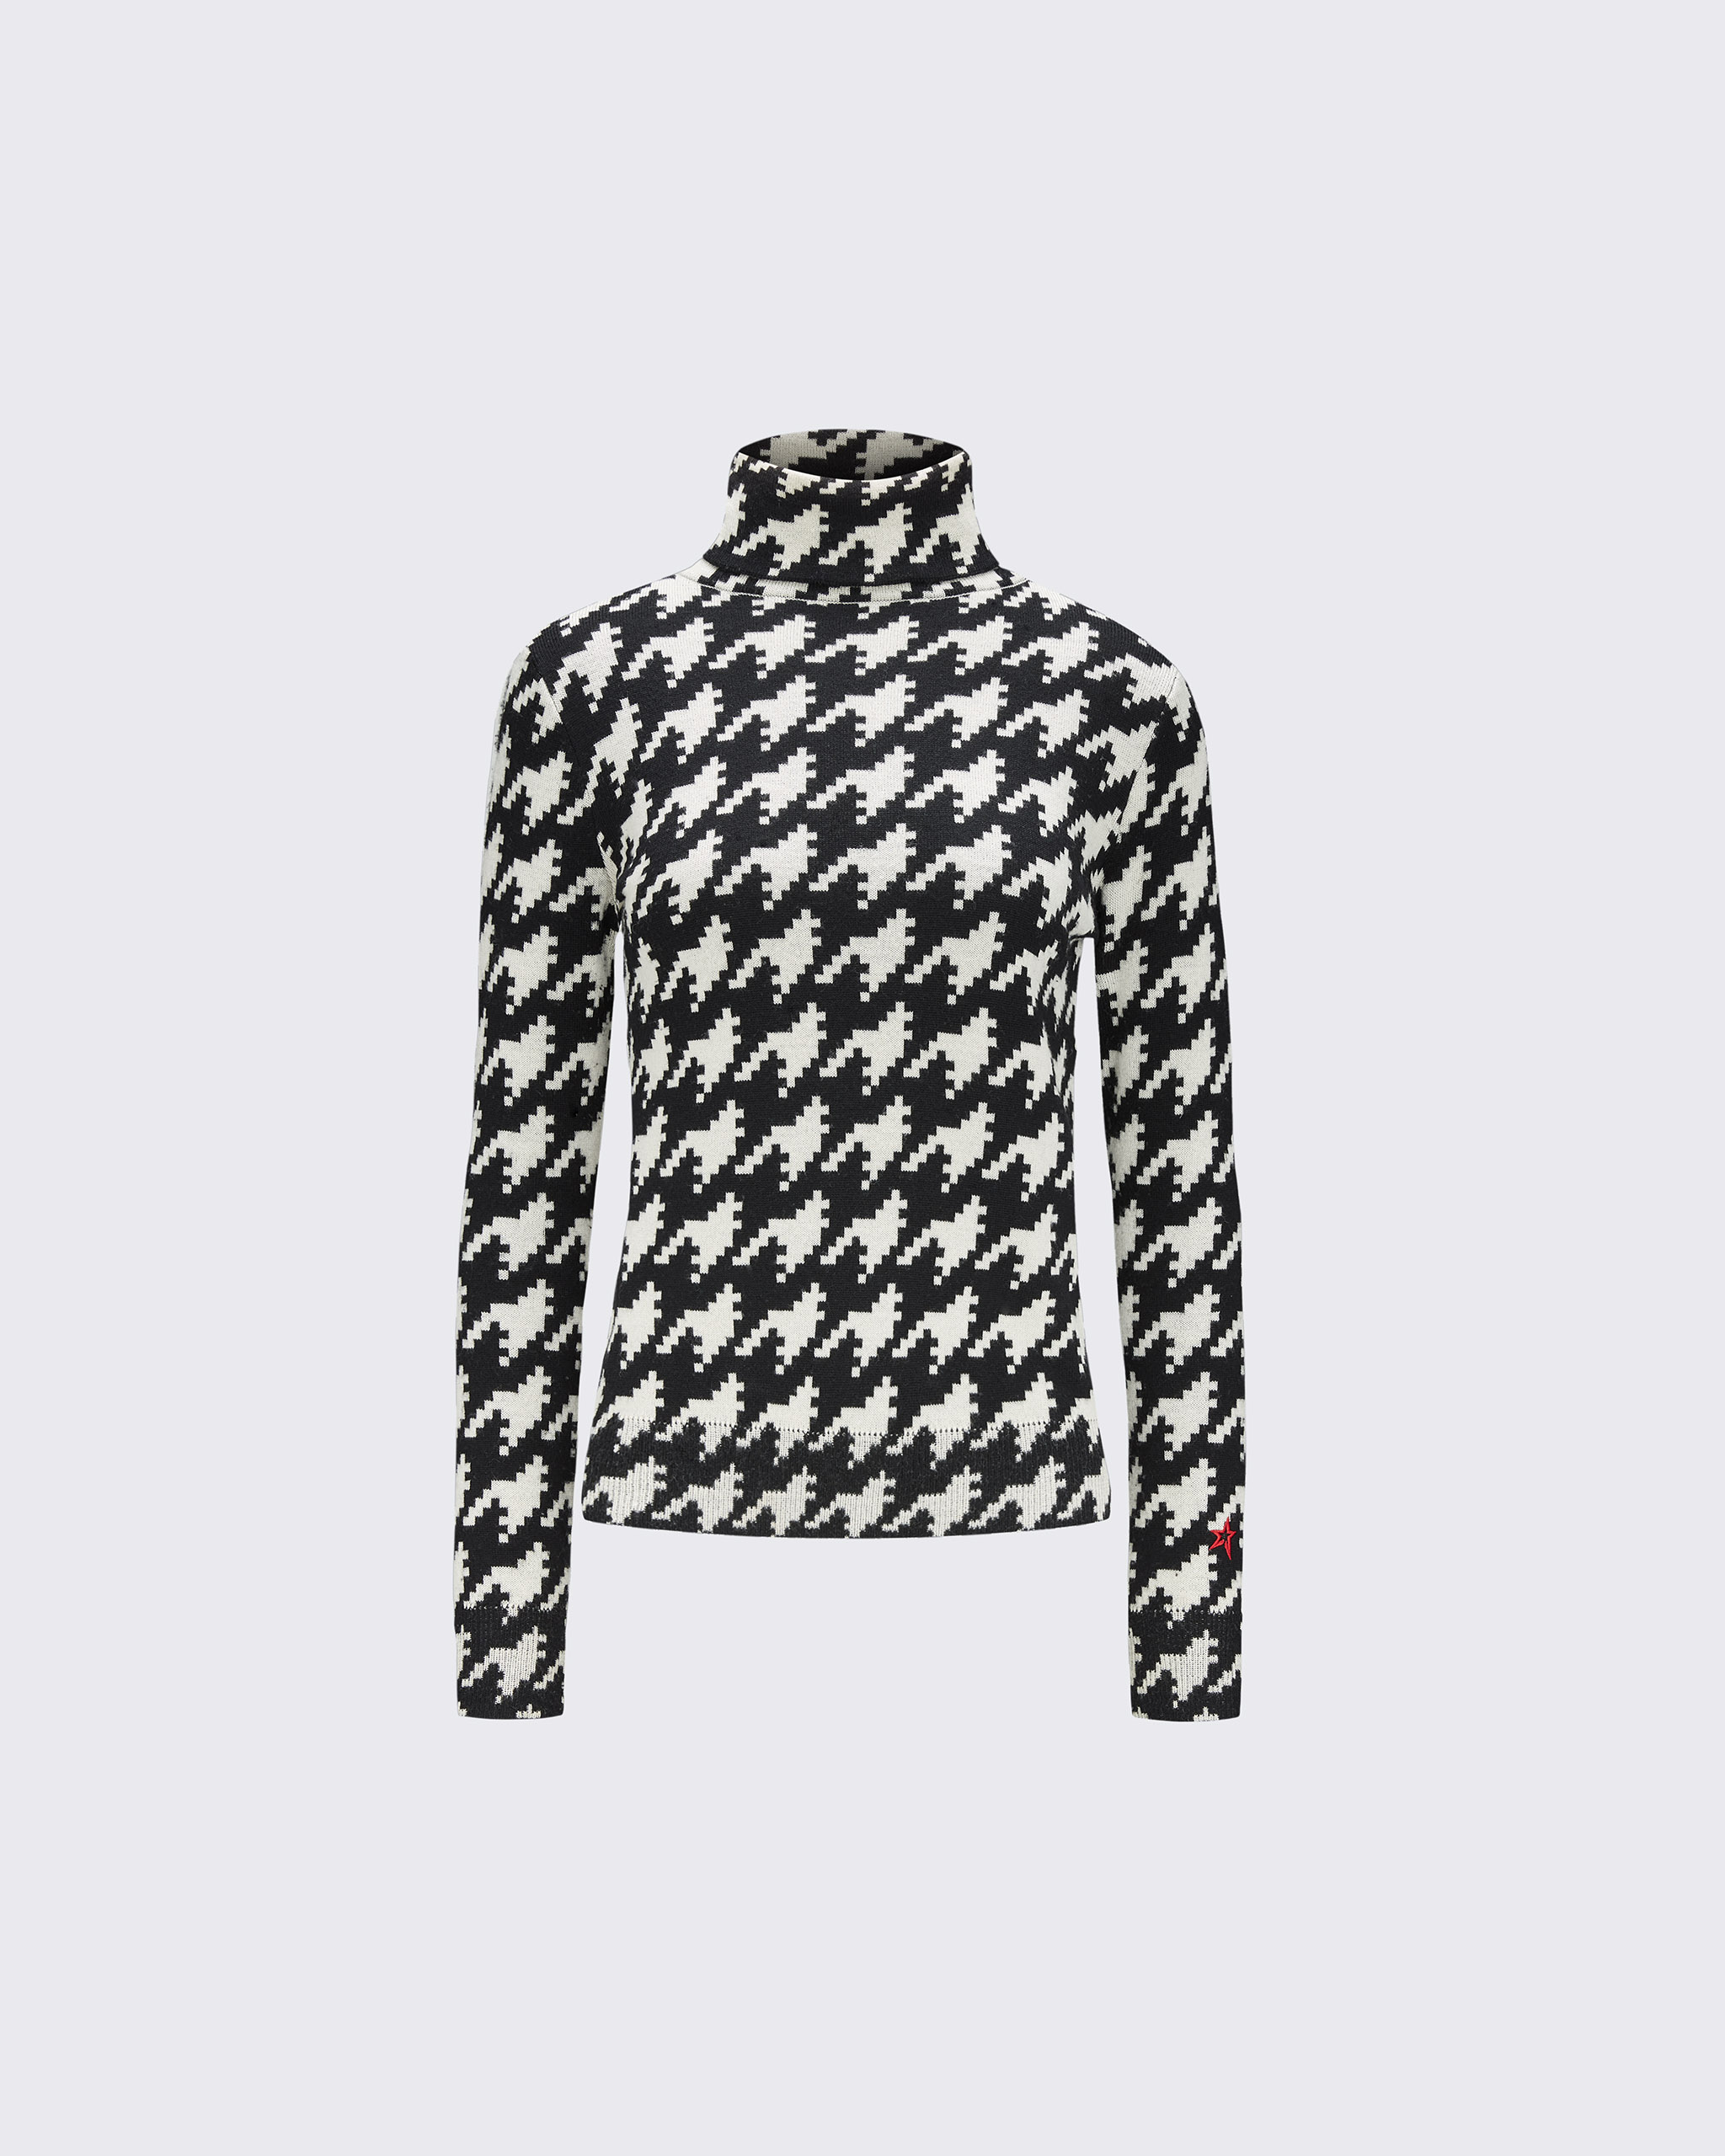 Perfect Moment Houndstooth Merino Wool Turtleneck In Black-white-houndstooth-print